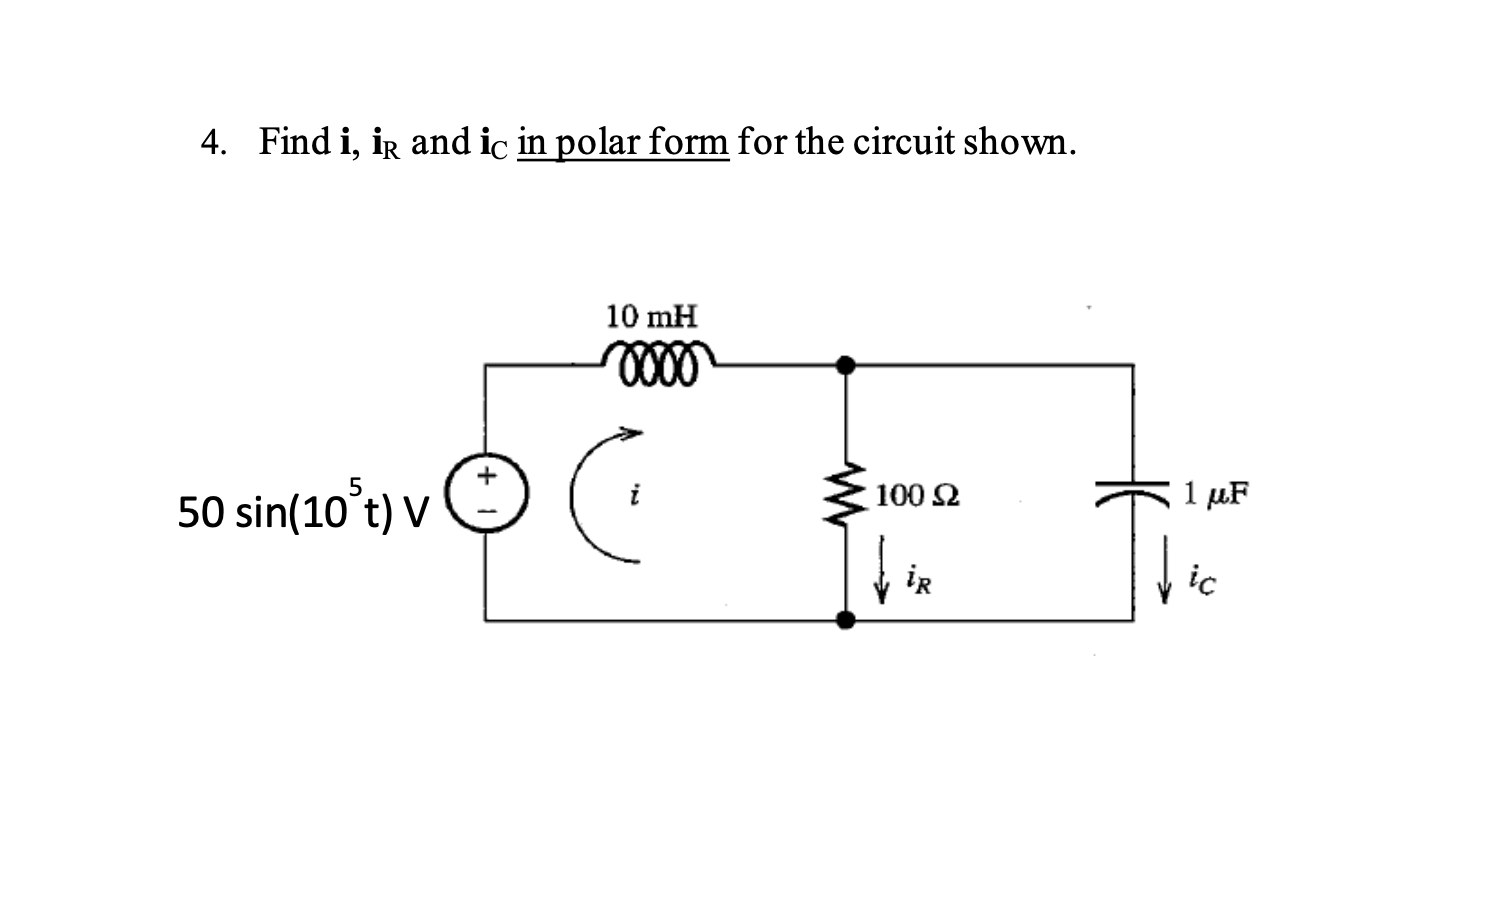 4. Find i, ir and ic in polar form for the circuit shown.
10 mH
50 sin(10 t) V
1 µF
100 Ω
ir
ic
